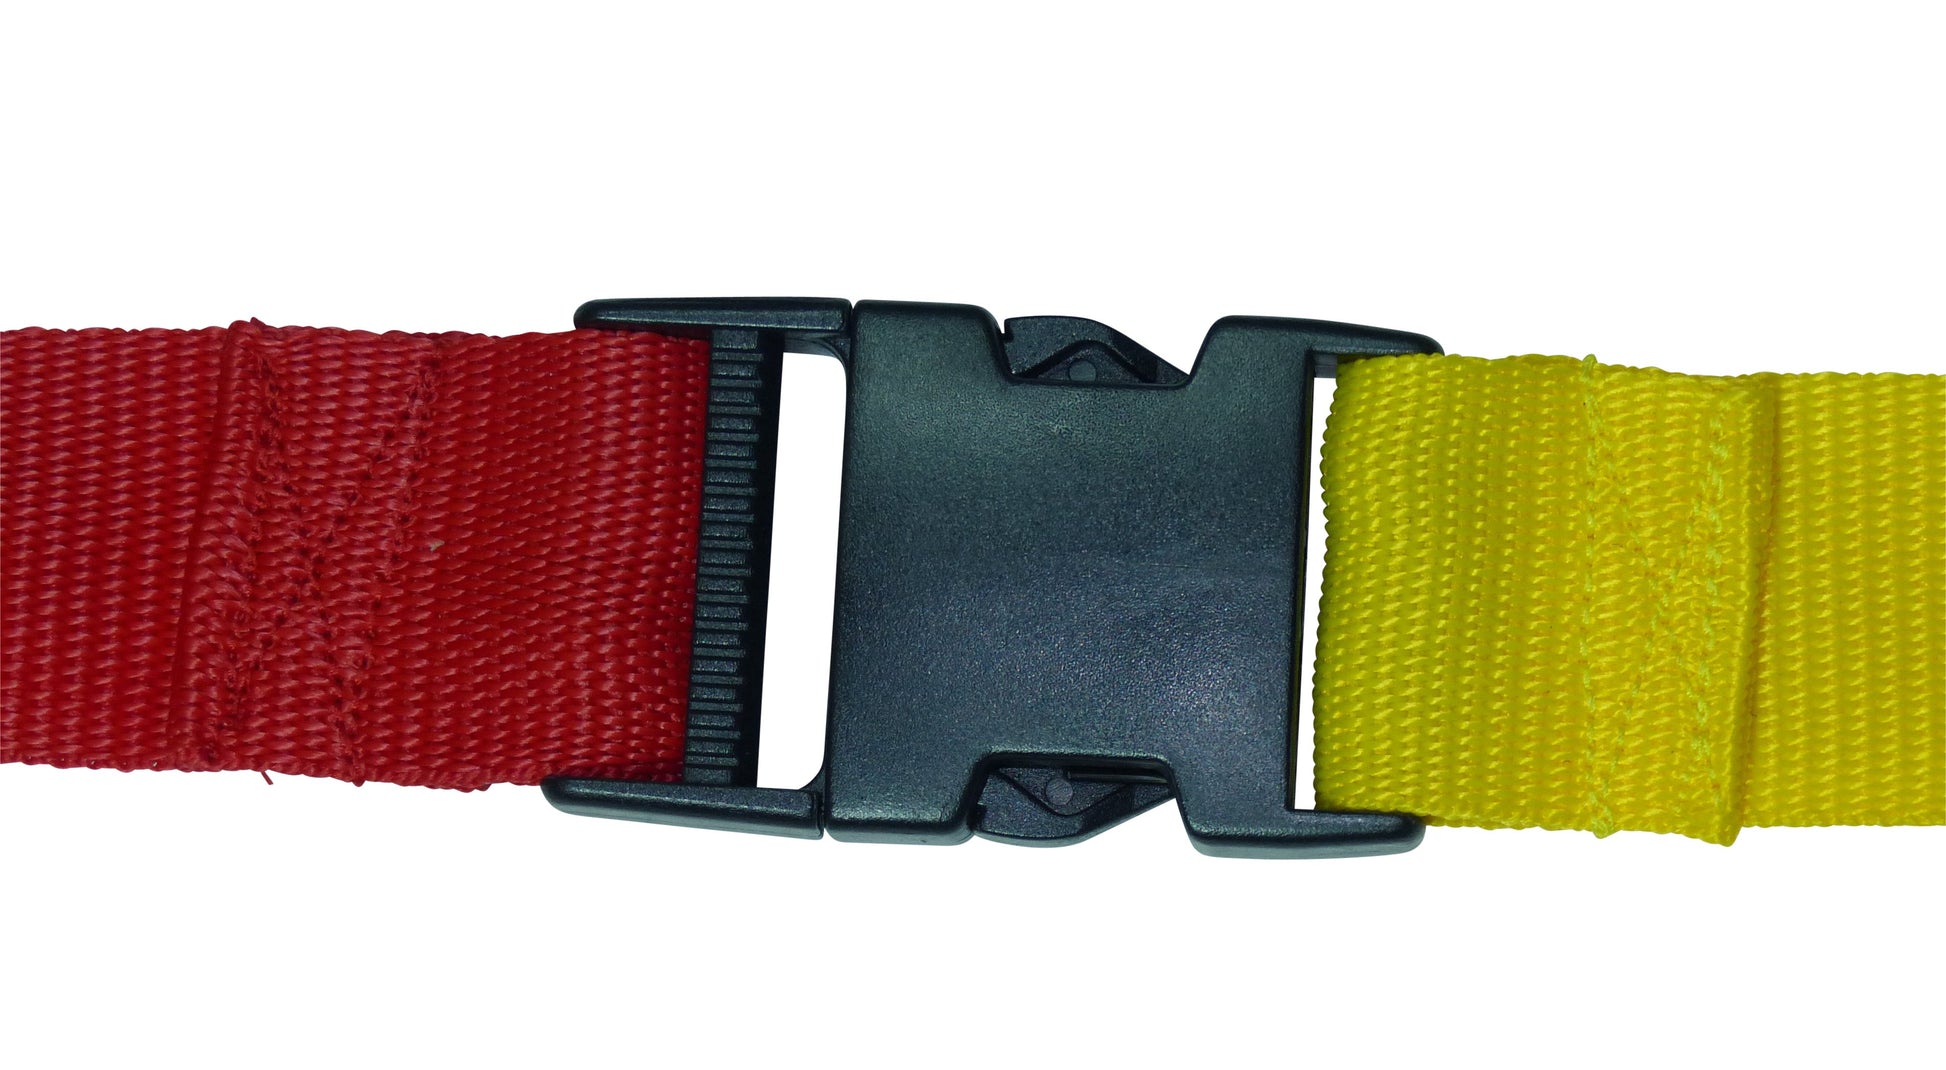 Benristraps 20mm plastic quick release buckle sewn onto two different webbings